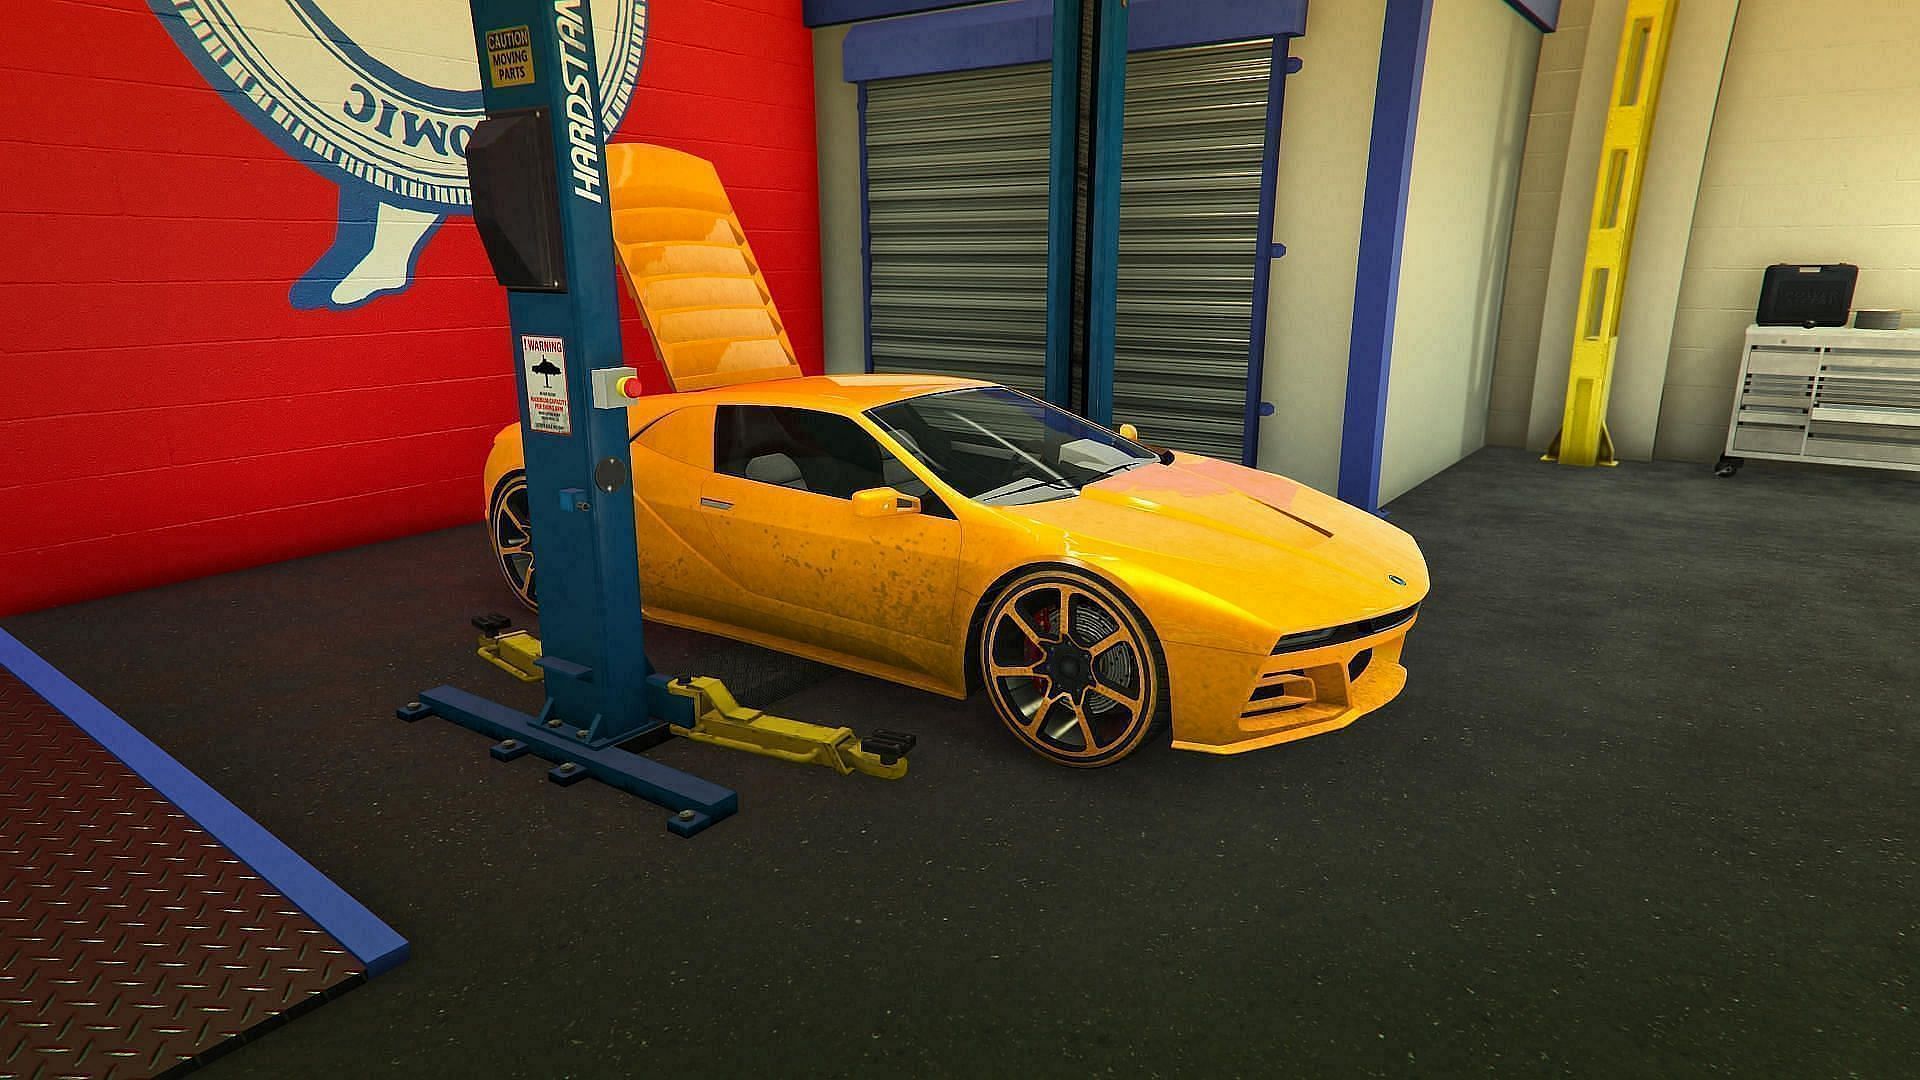 The SC1 is a good example of a car you could still get through the Auto Shop with some good RNG (Image via Rockstar Games)